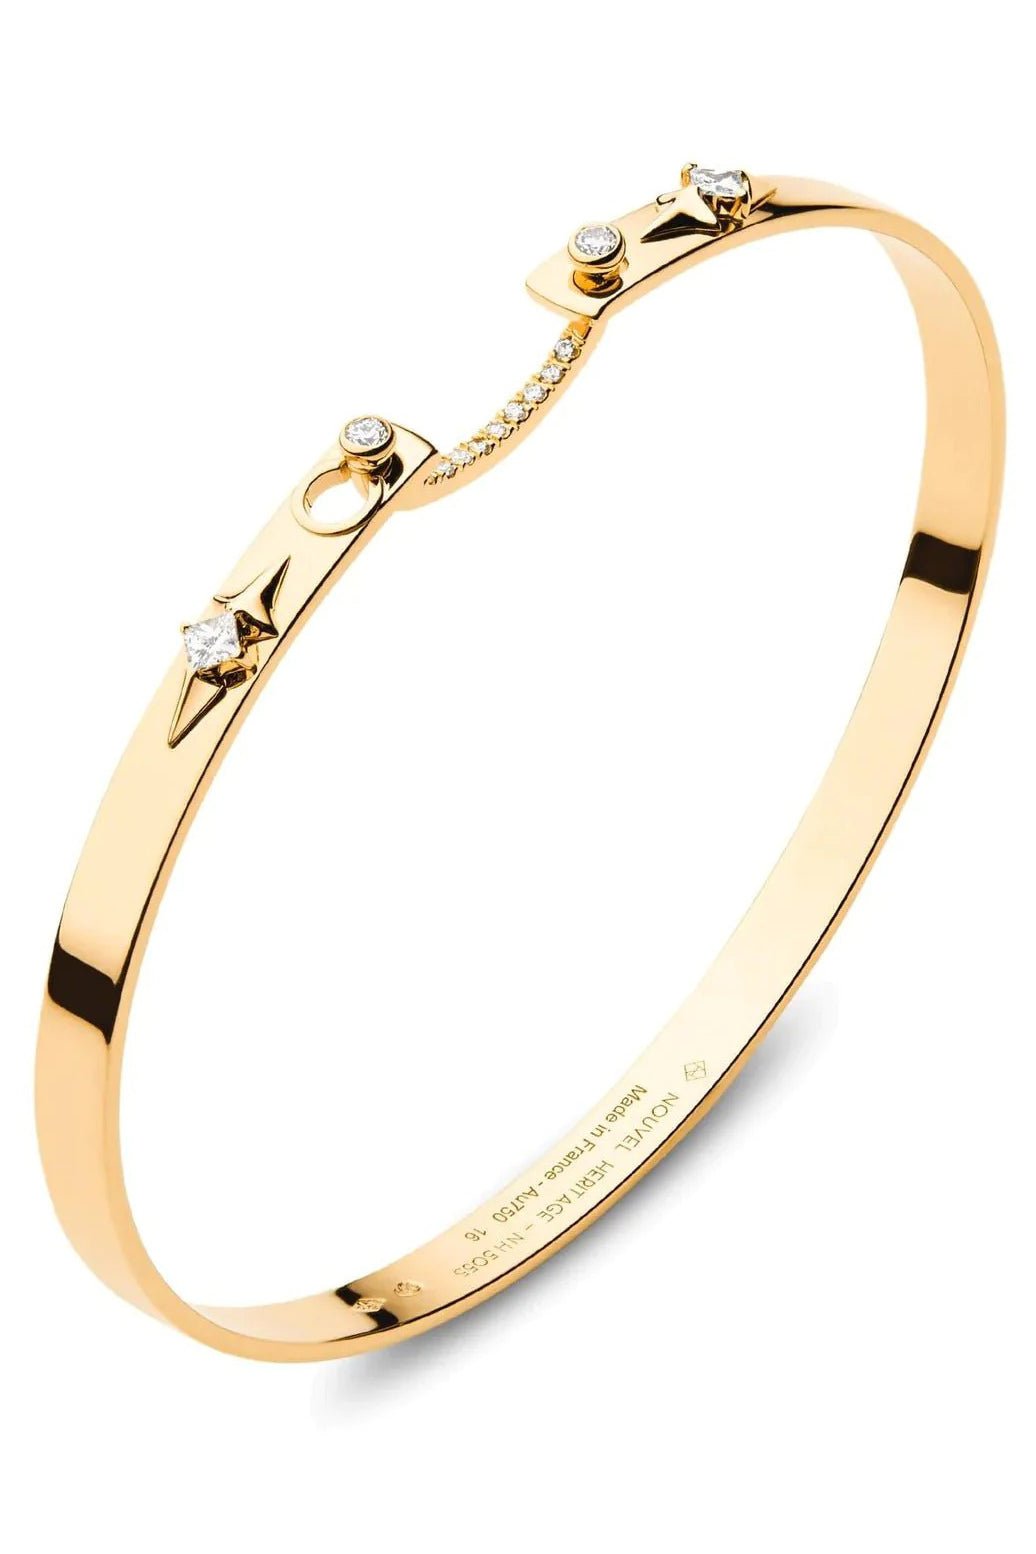 NOUVEL HERITAGE-Reverie Bangle-YELLOW GOLD